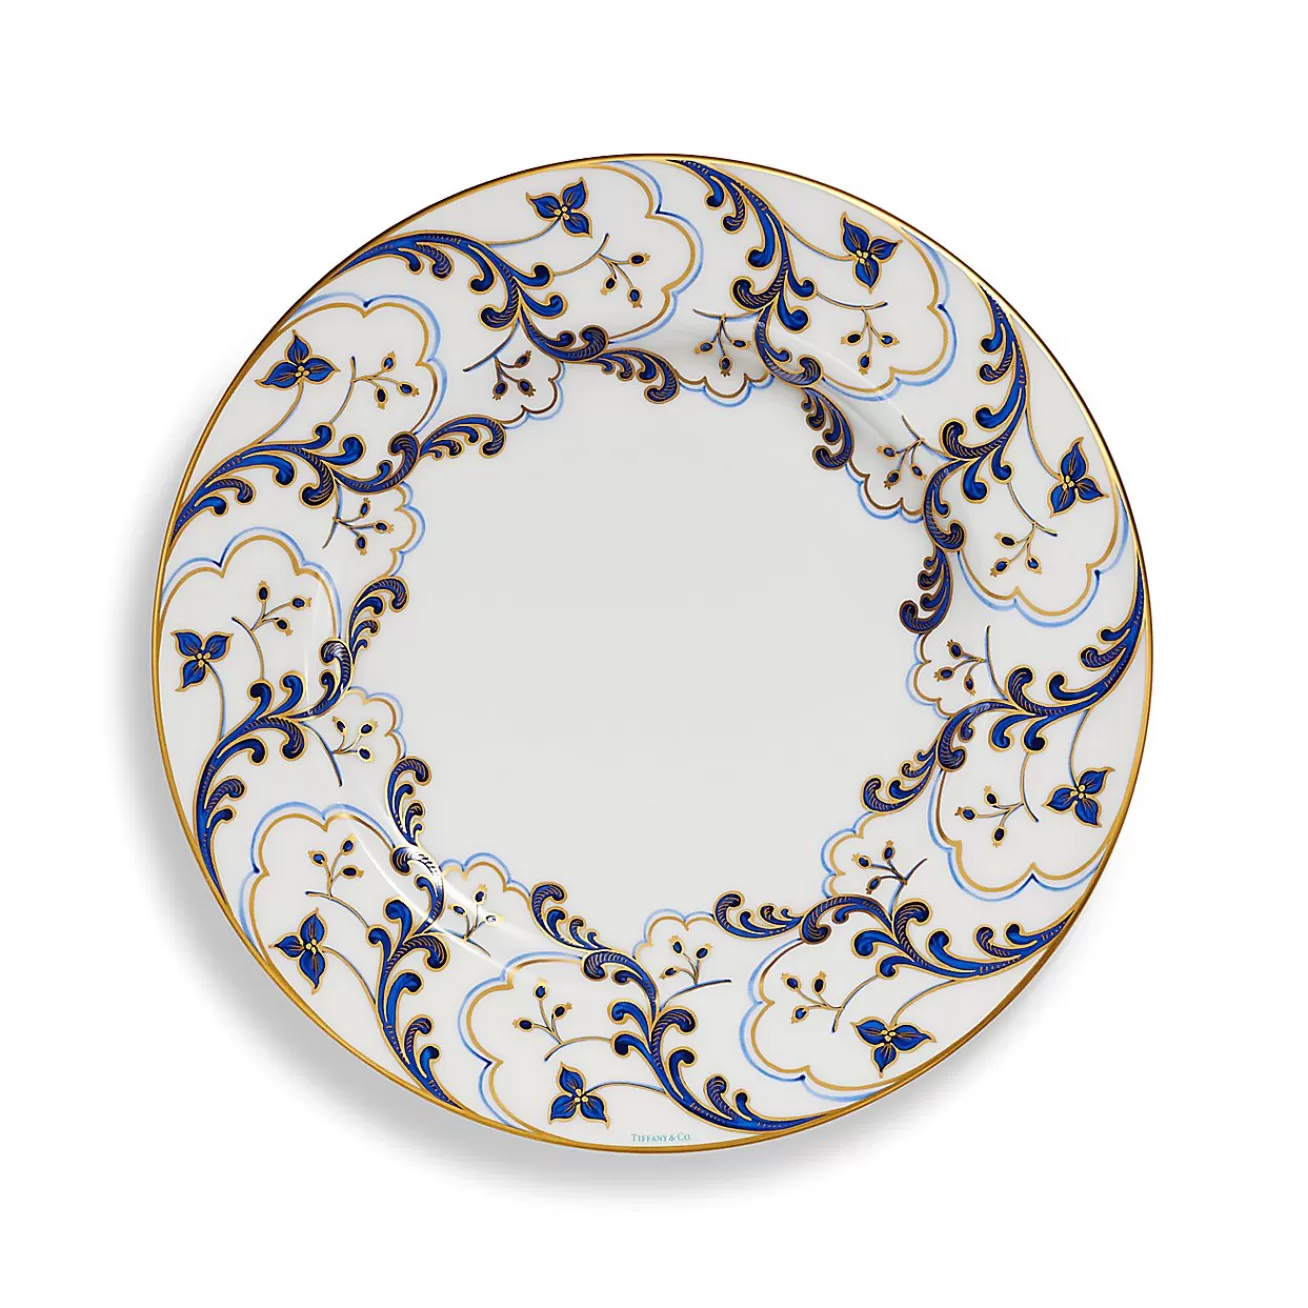 Tiffany & Co. Valse Bleue Dinner Plate in Bone China | ^ The Home | Housewarming Gifts